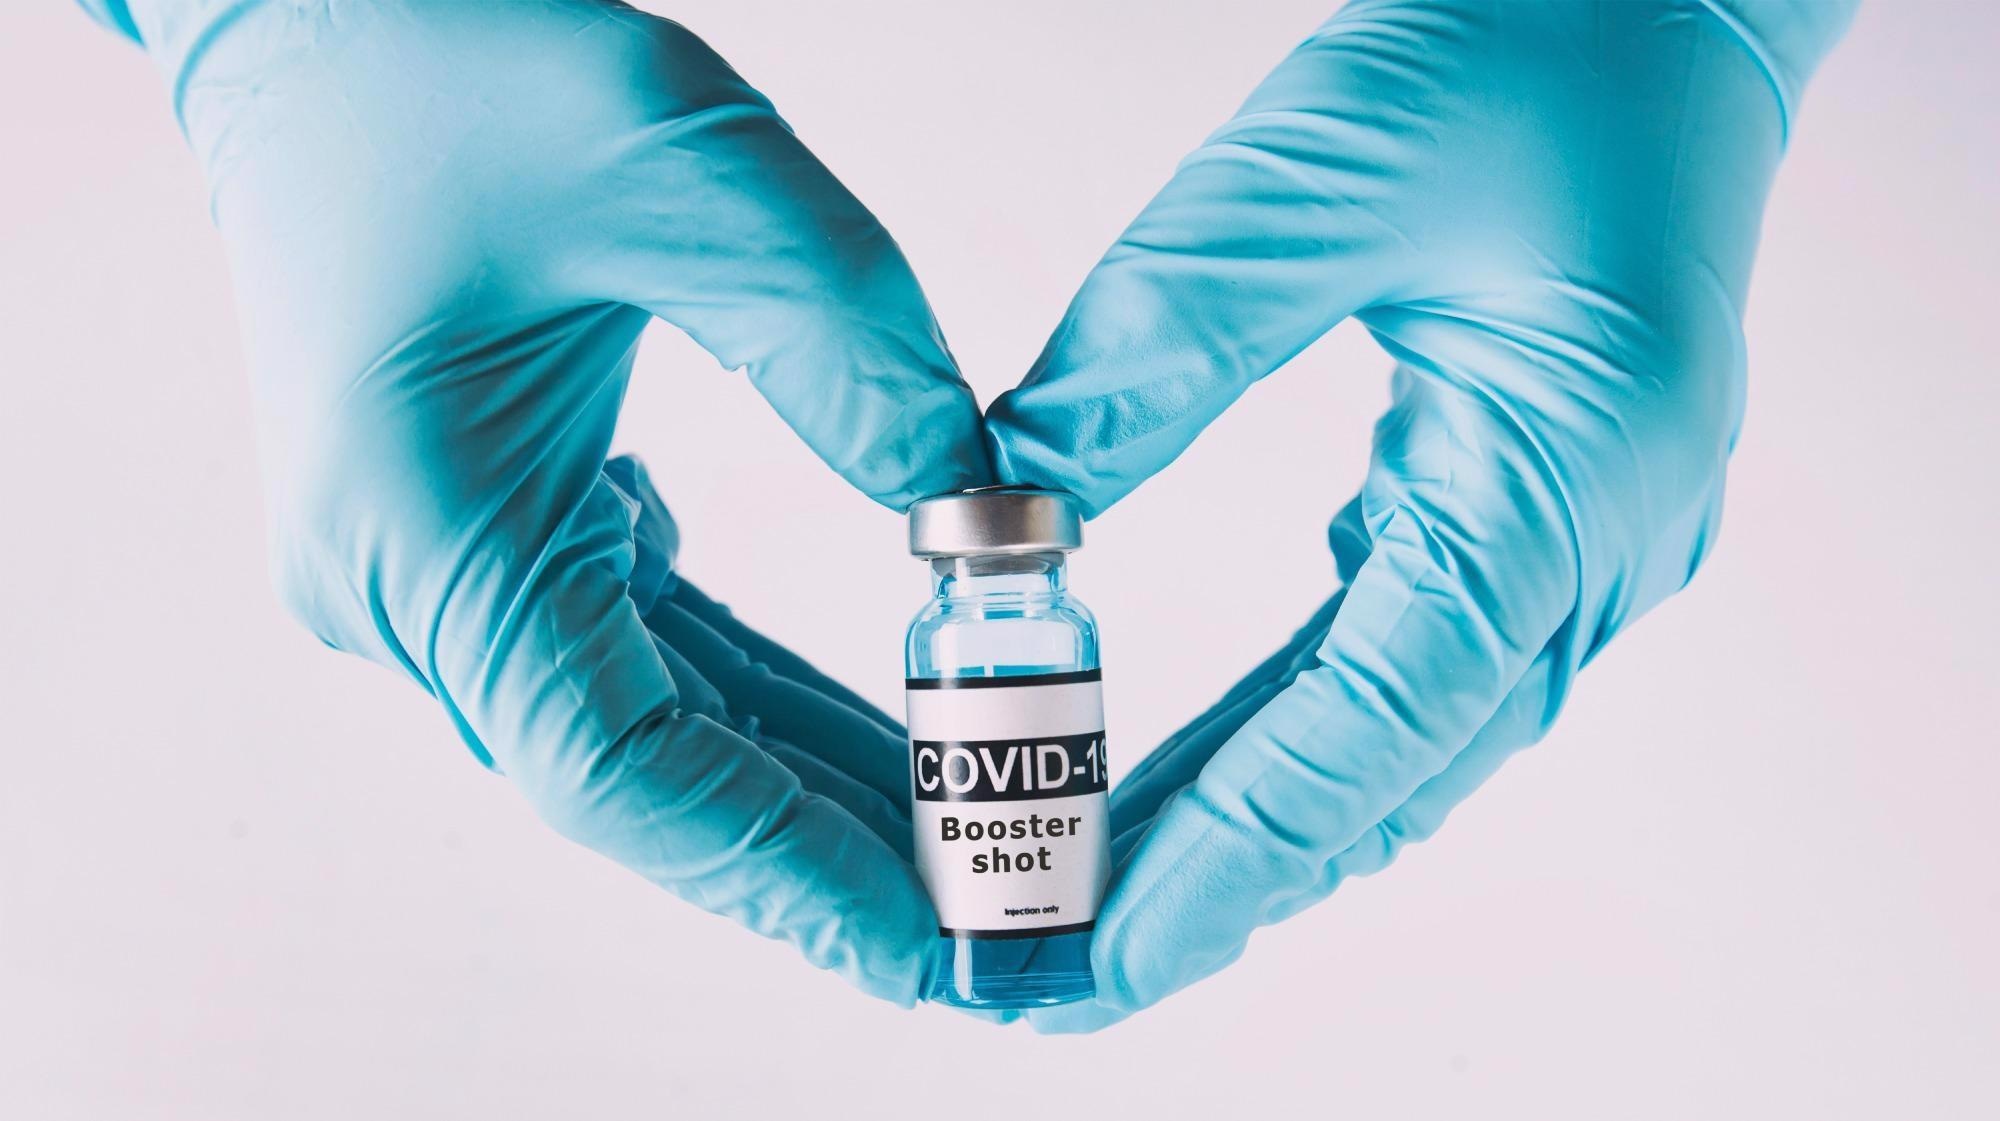 Study: Humoral immune responses against SARS-CoV-2 variants including omicron in solid organ transplant recipients after three doses of a COVID-19 mRNA vaccine. Image Credit: Skylines / Shutterstock